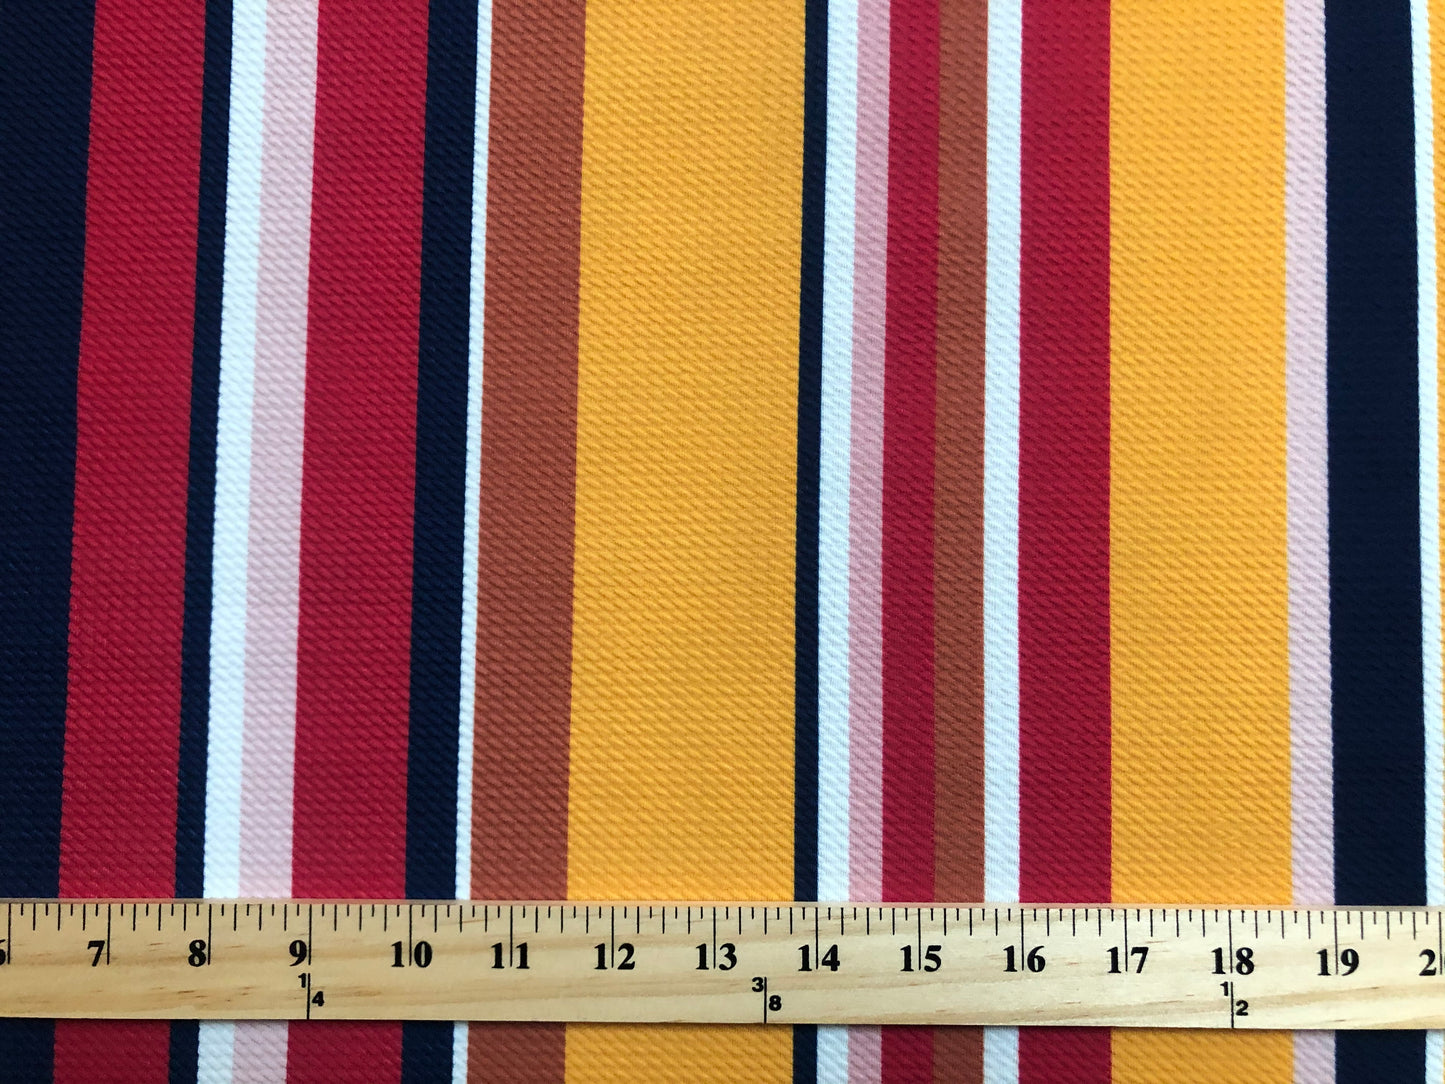 Bullet Knit Printed Fabric-Mustard Red Brown Stripes-BPR219-Sold by the Yard-Bulk Available